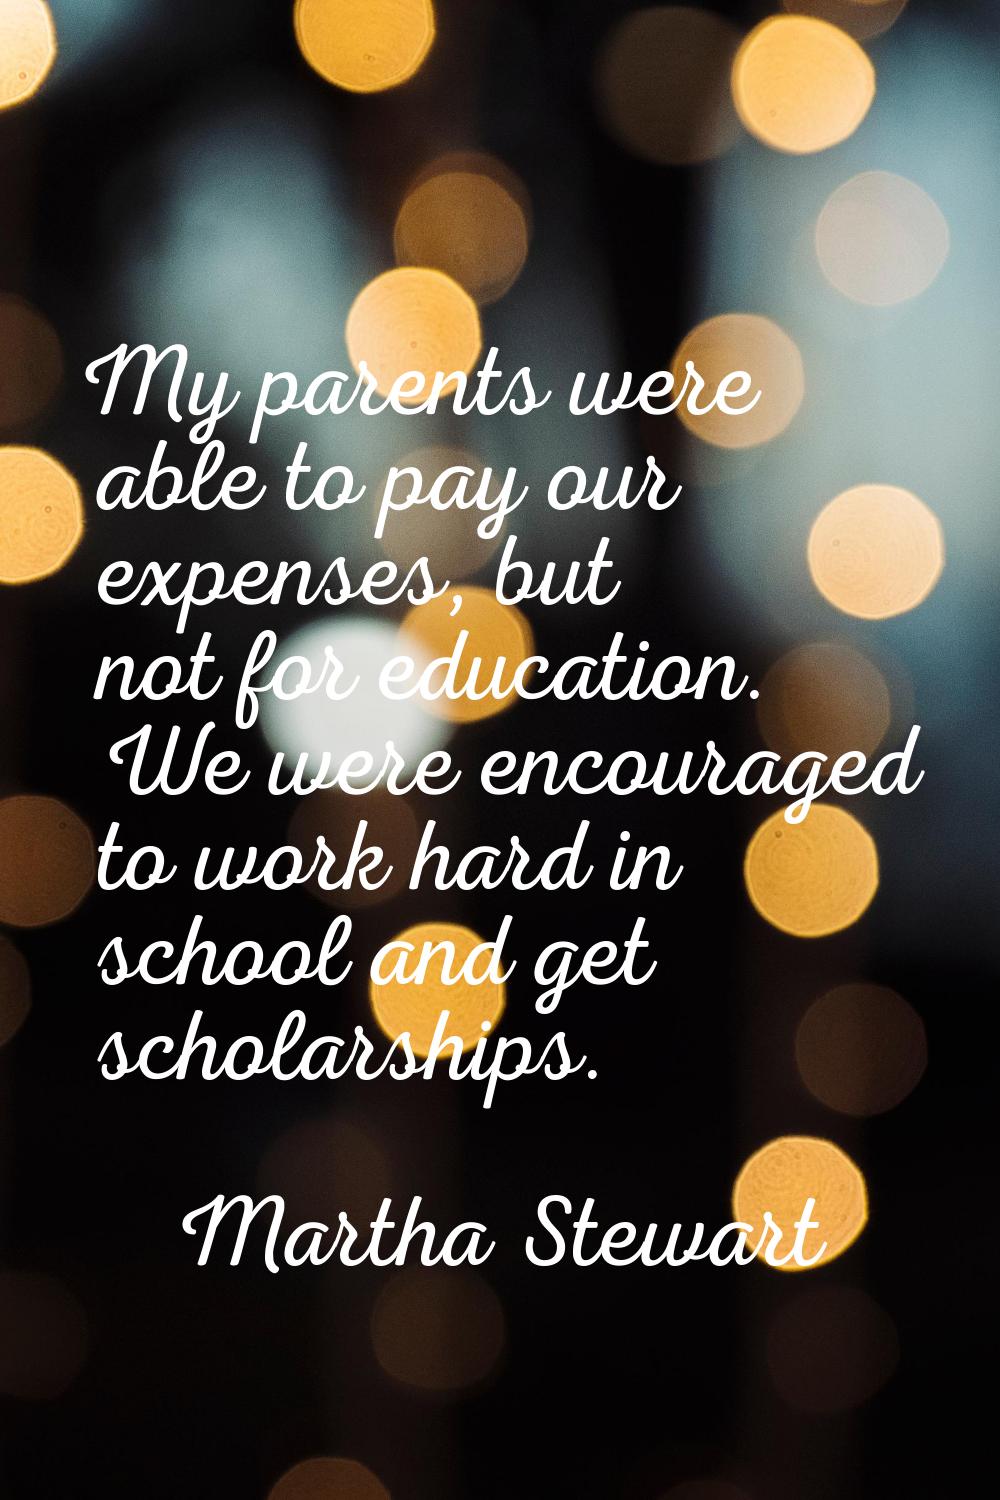 My parents were able to pay our expenses, but not for education. We were encouraged to work hard in